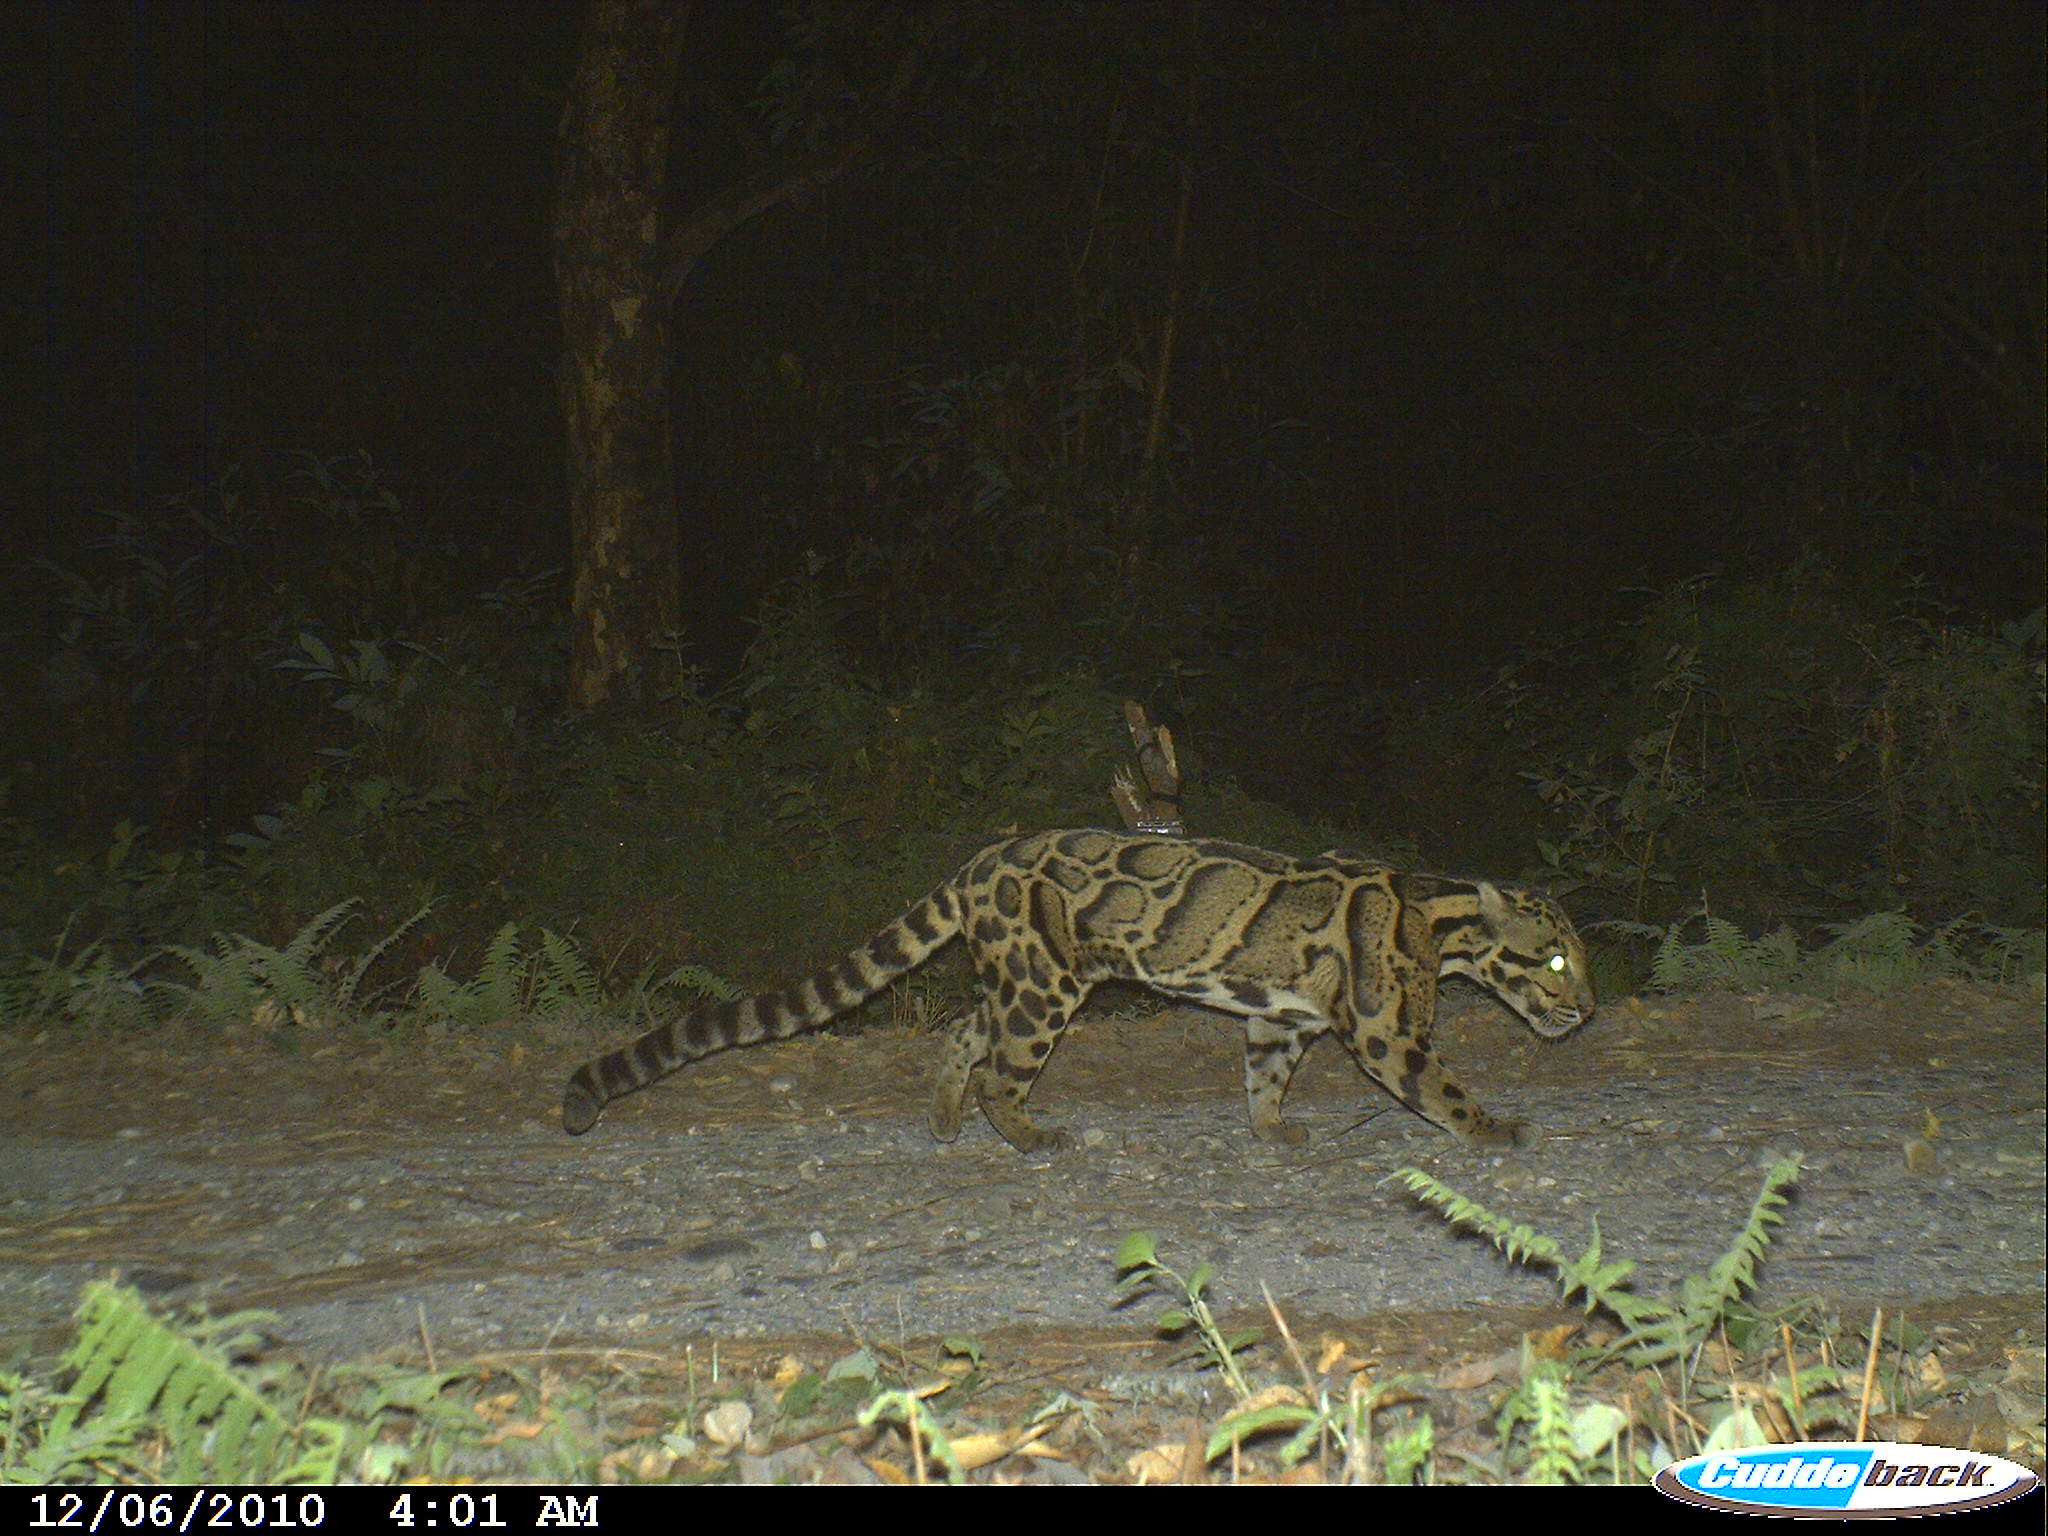 Clouded leopard photographed by camera trap in Manas National Park